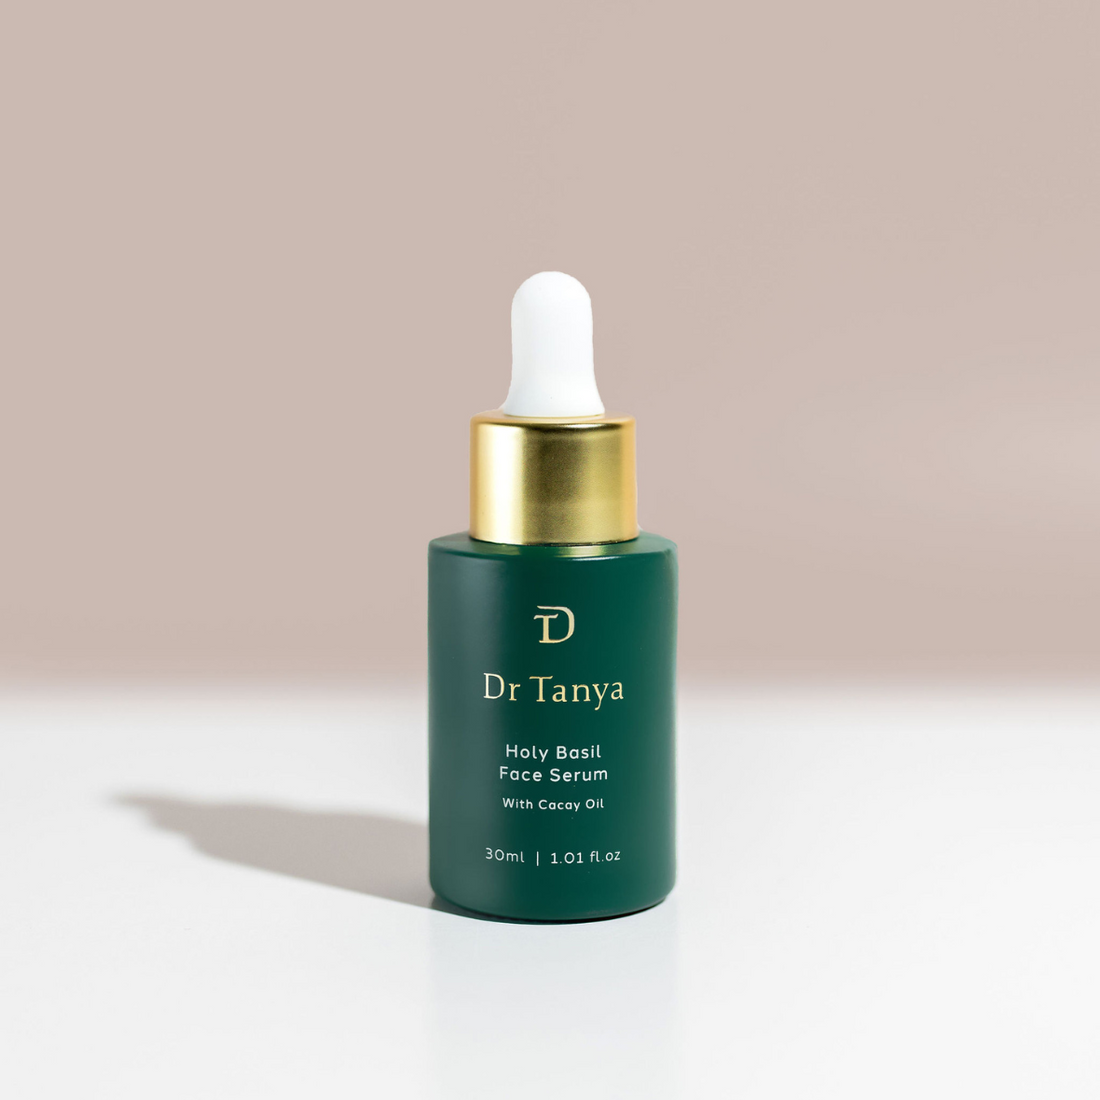 One deep green coloured bottle of face serum with a gold lid and white dropper